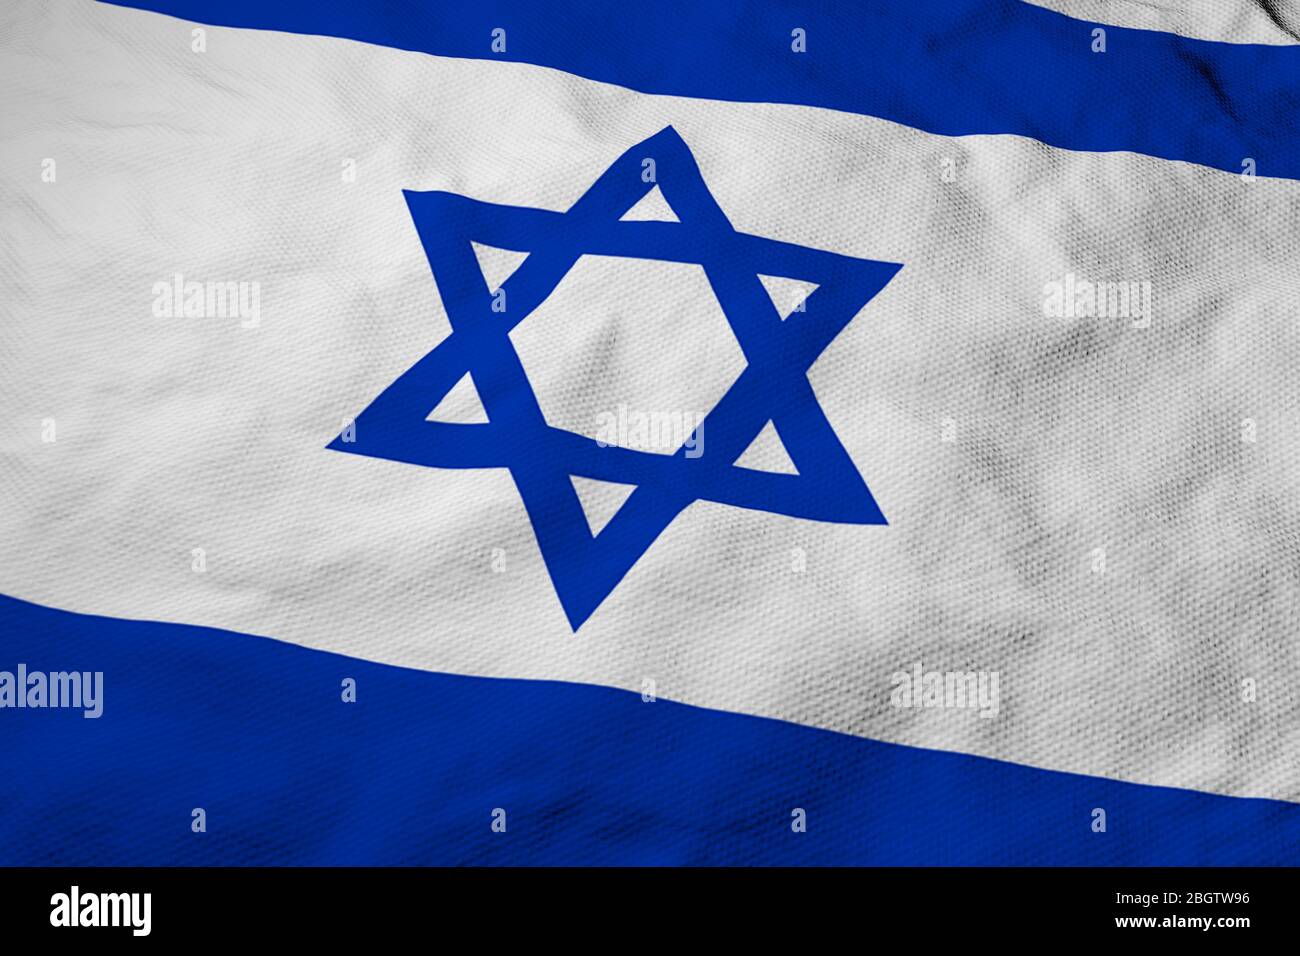 Full frame close-up on a waving Israeli flag in 3D rendering. Stock Photo